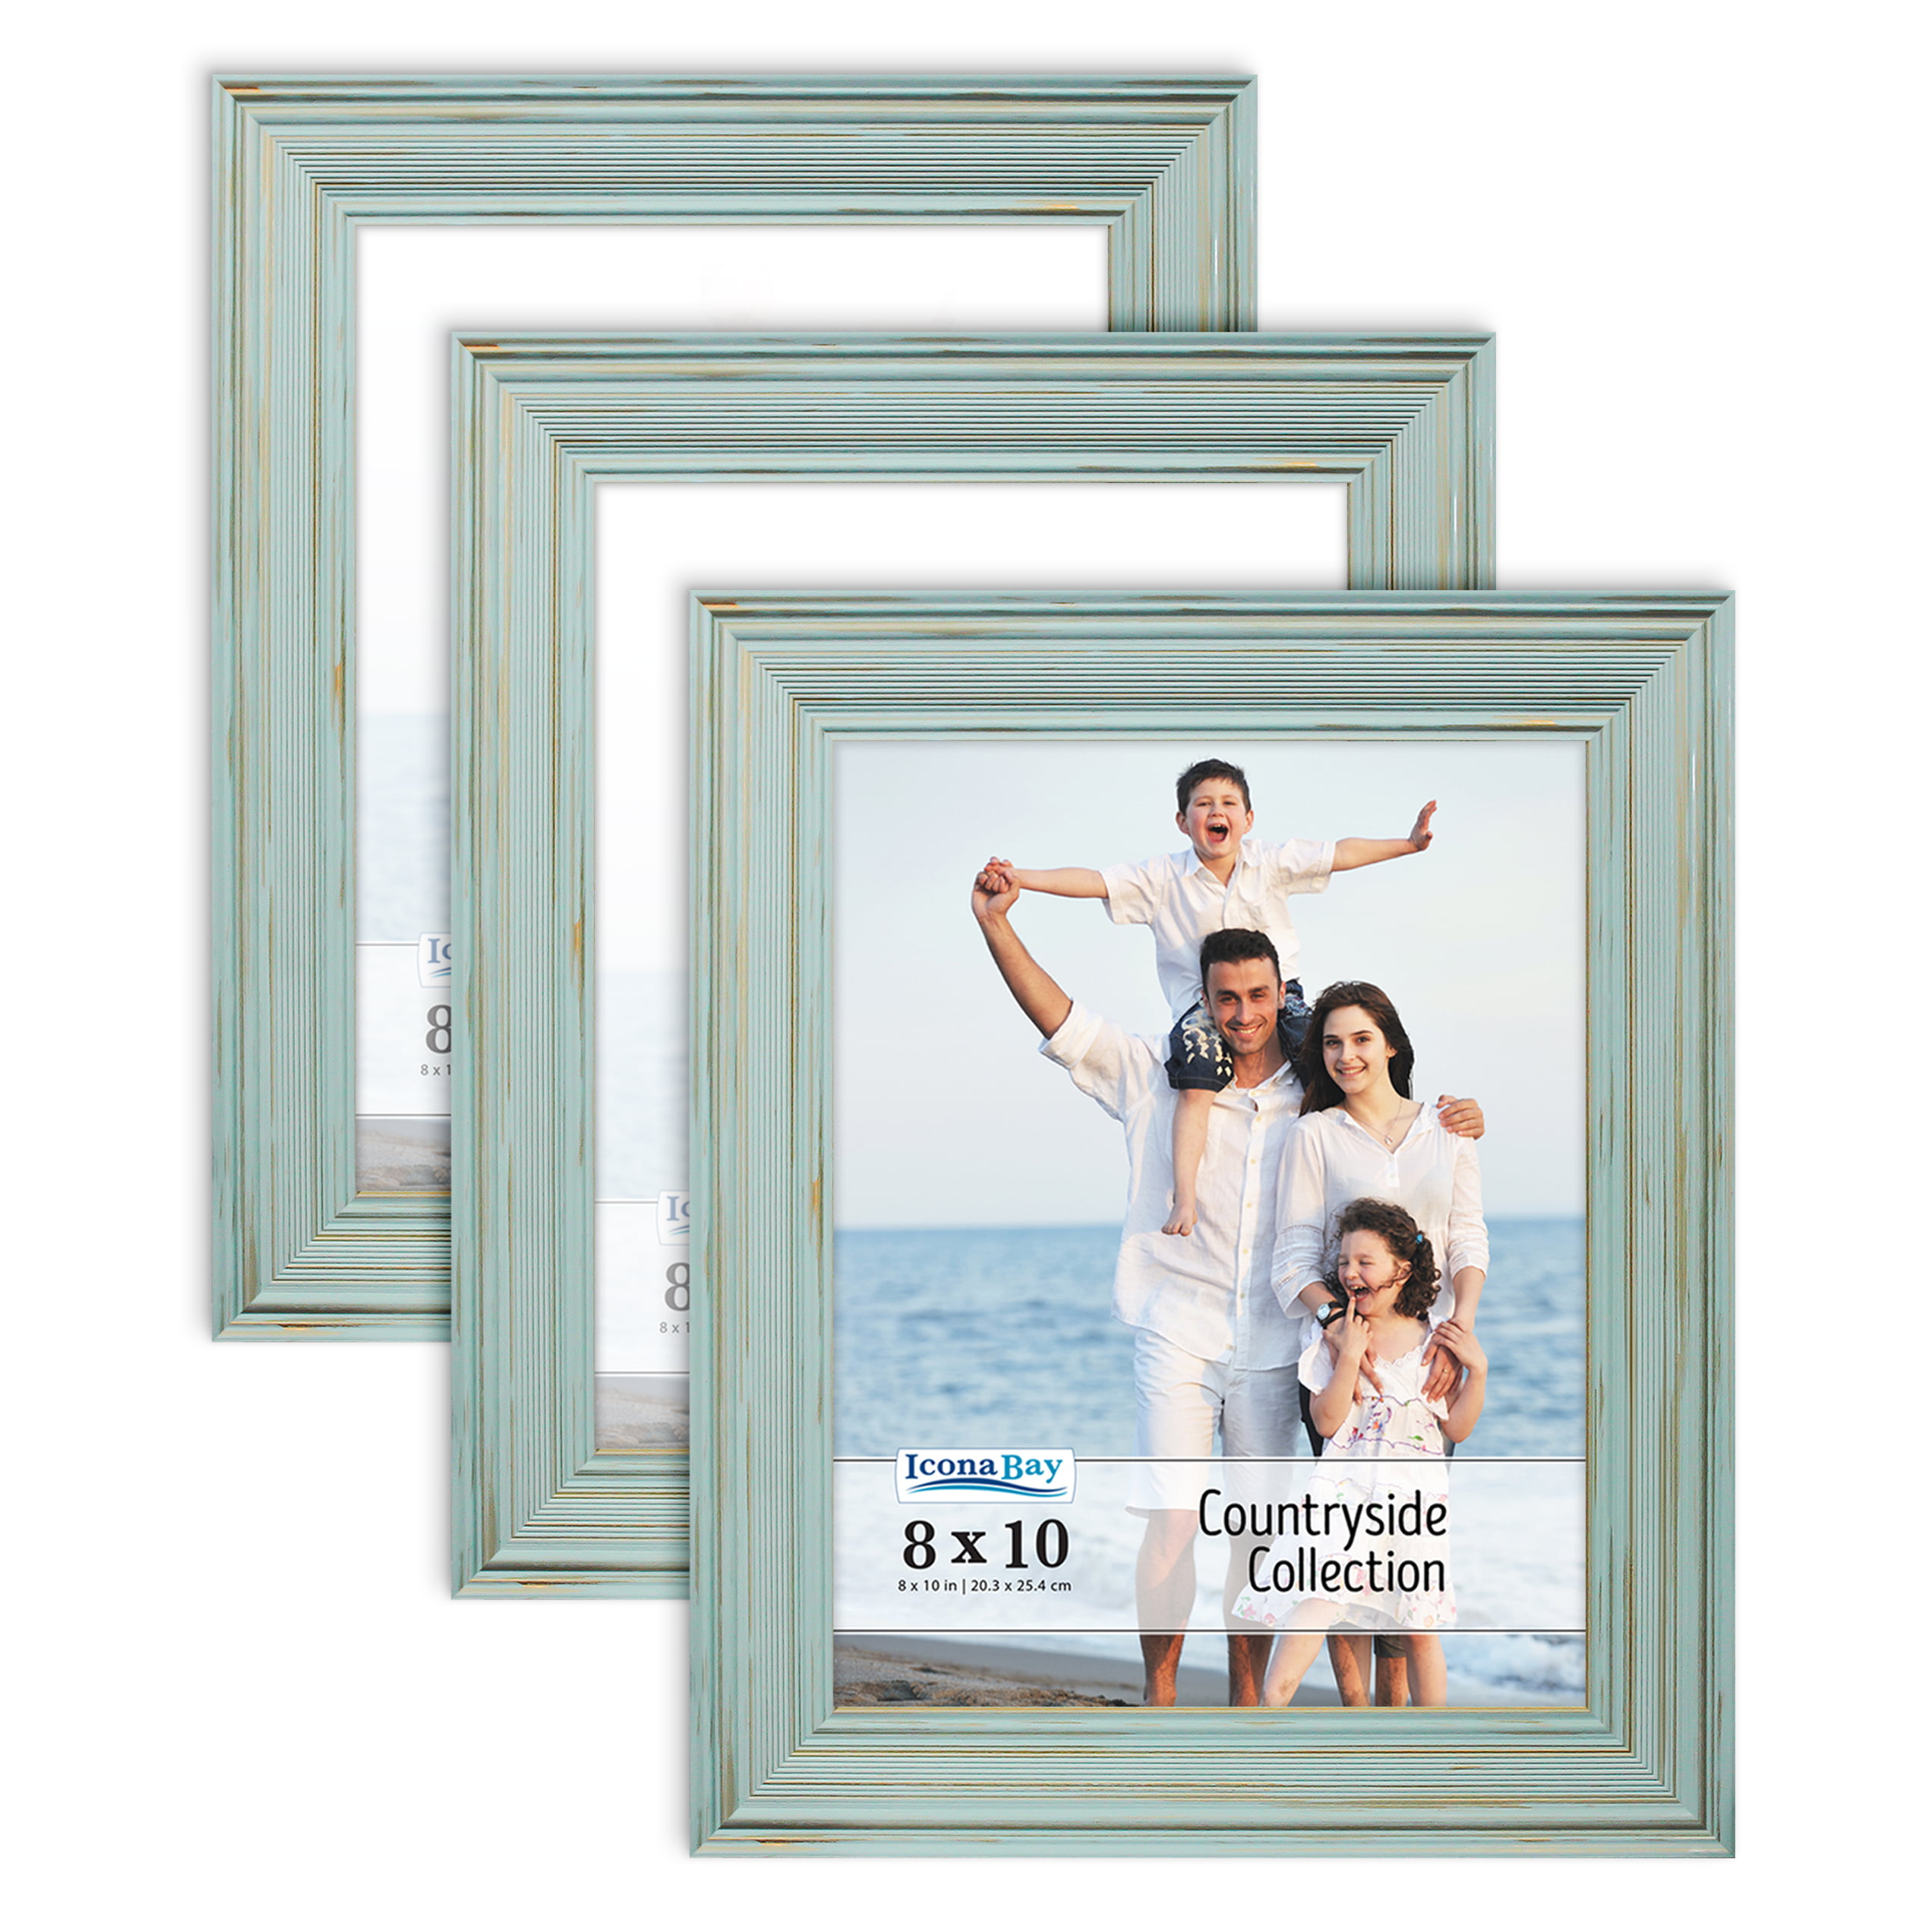 Teal Blue Natural Solid Wood Wall/ Tabletop Rustic Wooden Picture Frames